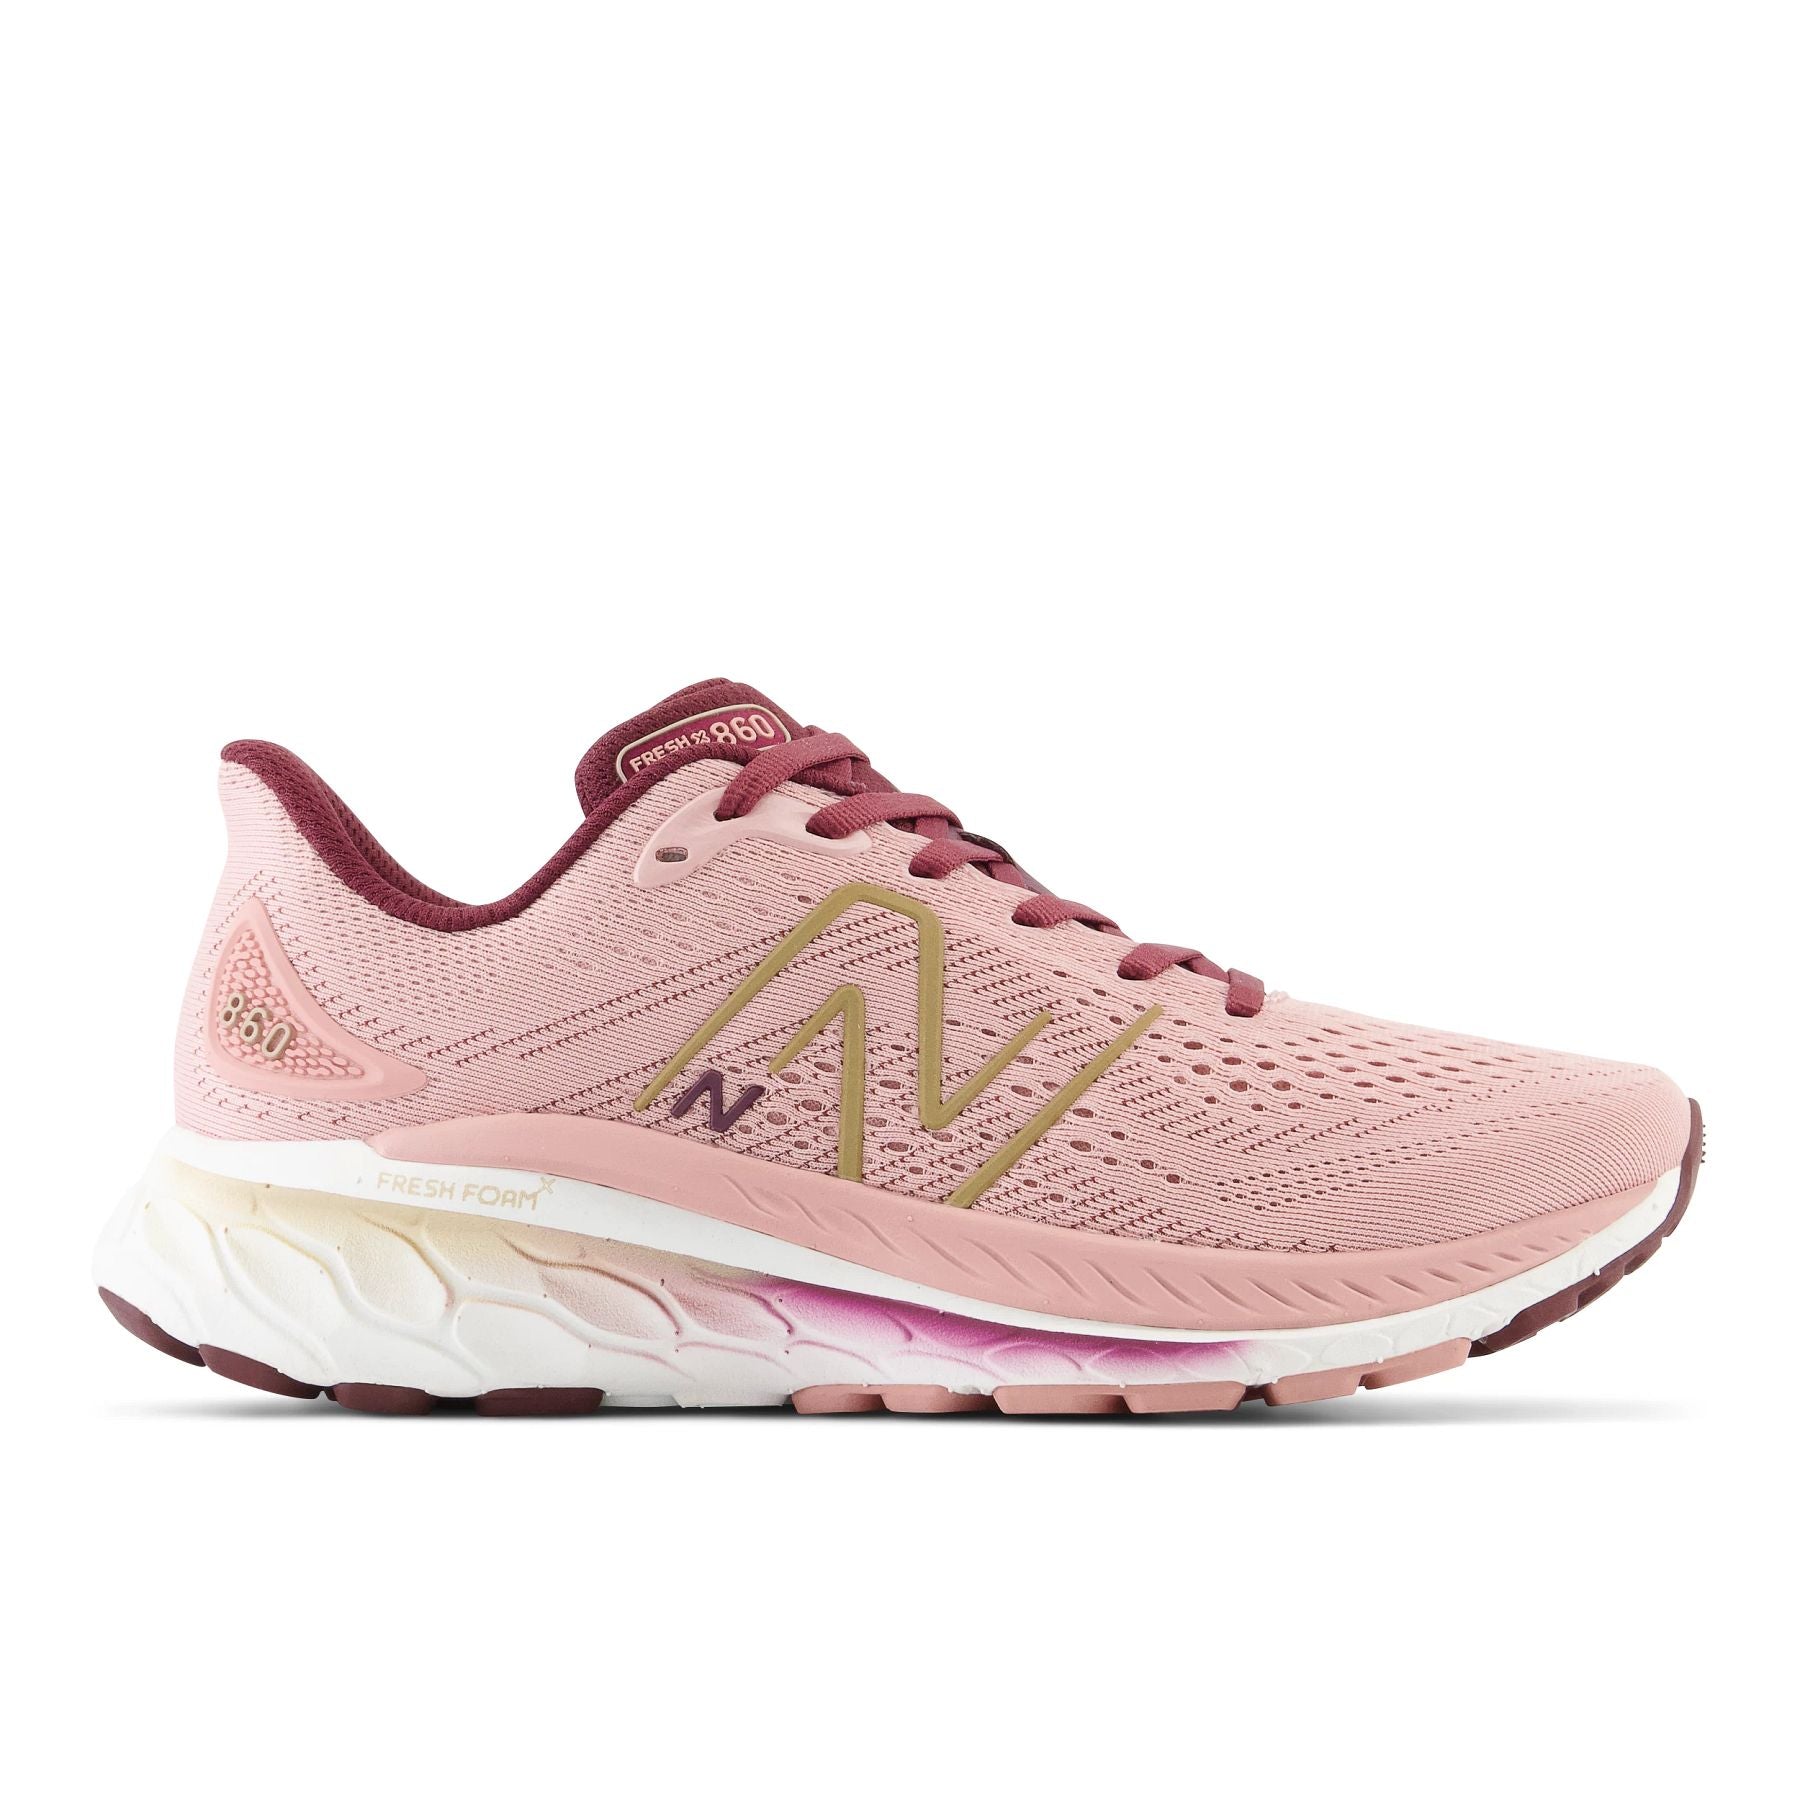 Lateral view of the Women's 860 V13 by New Balance in the color Pink Moon/Burgandy